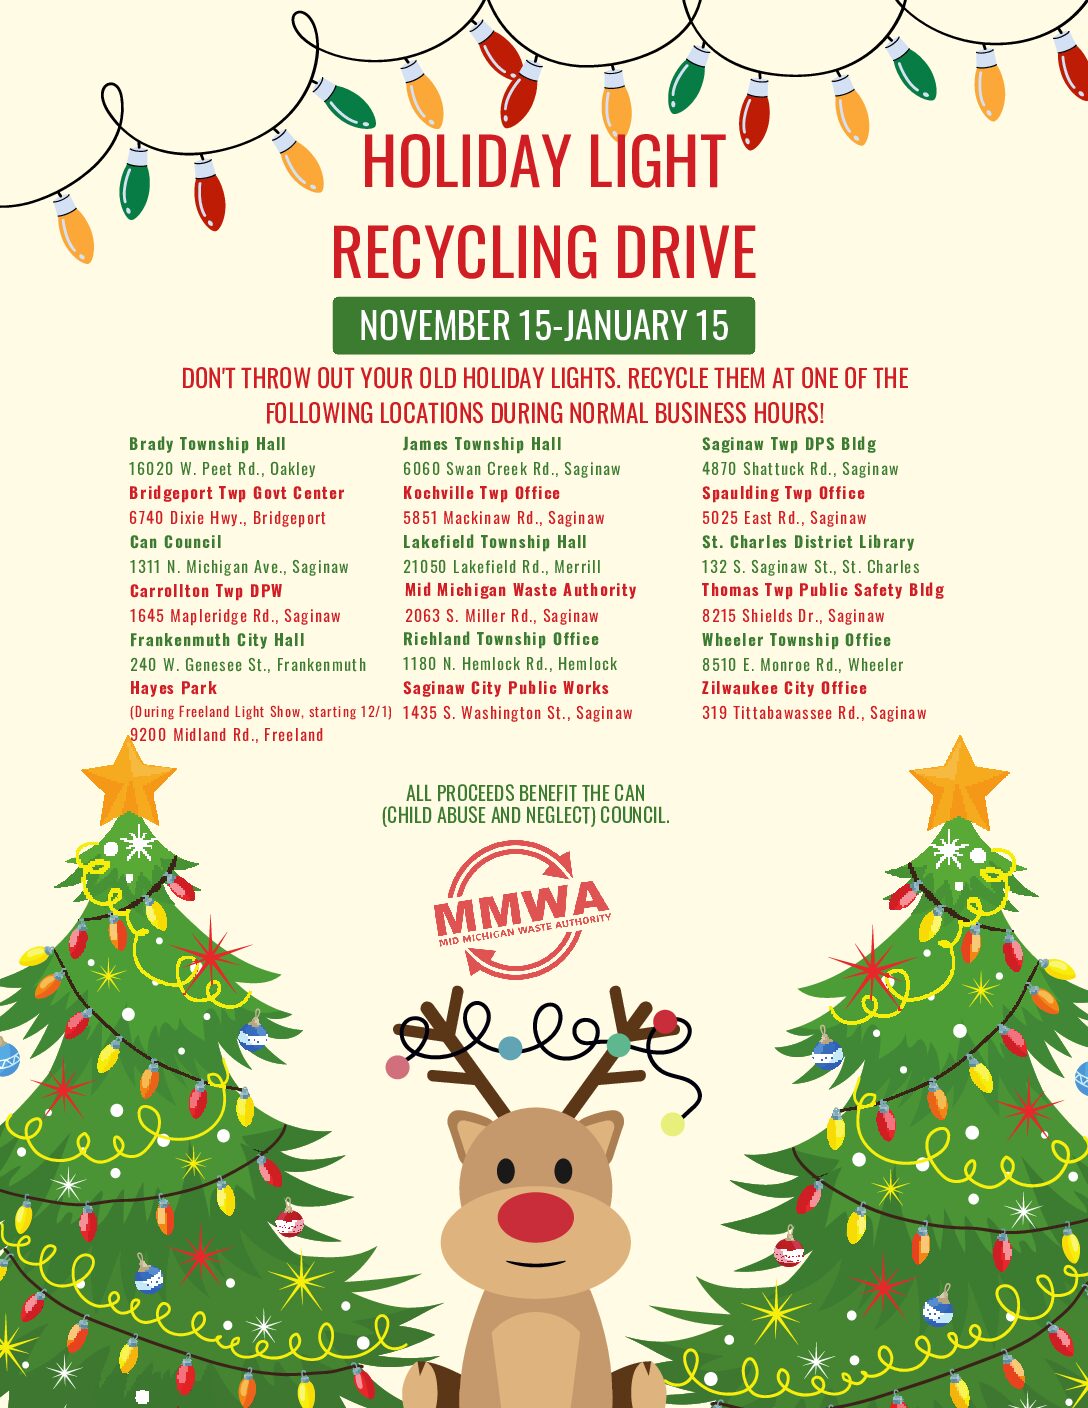 Holiday Light Recycling Drive Returns